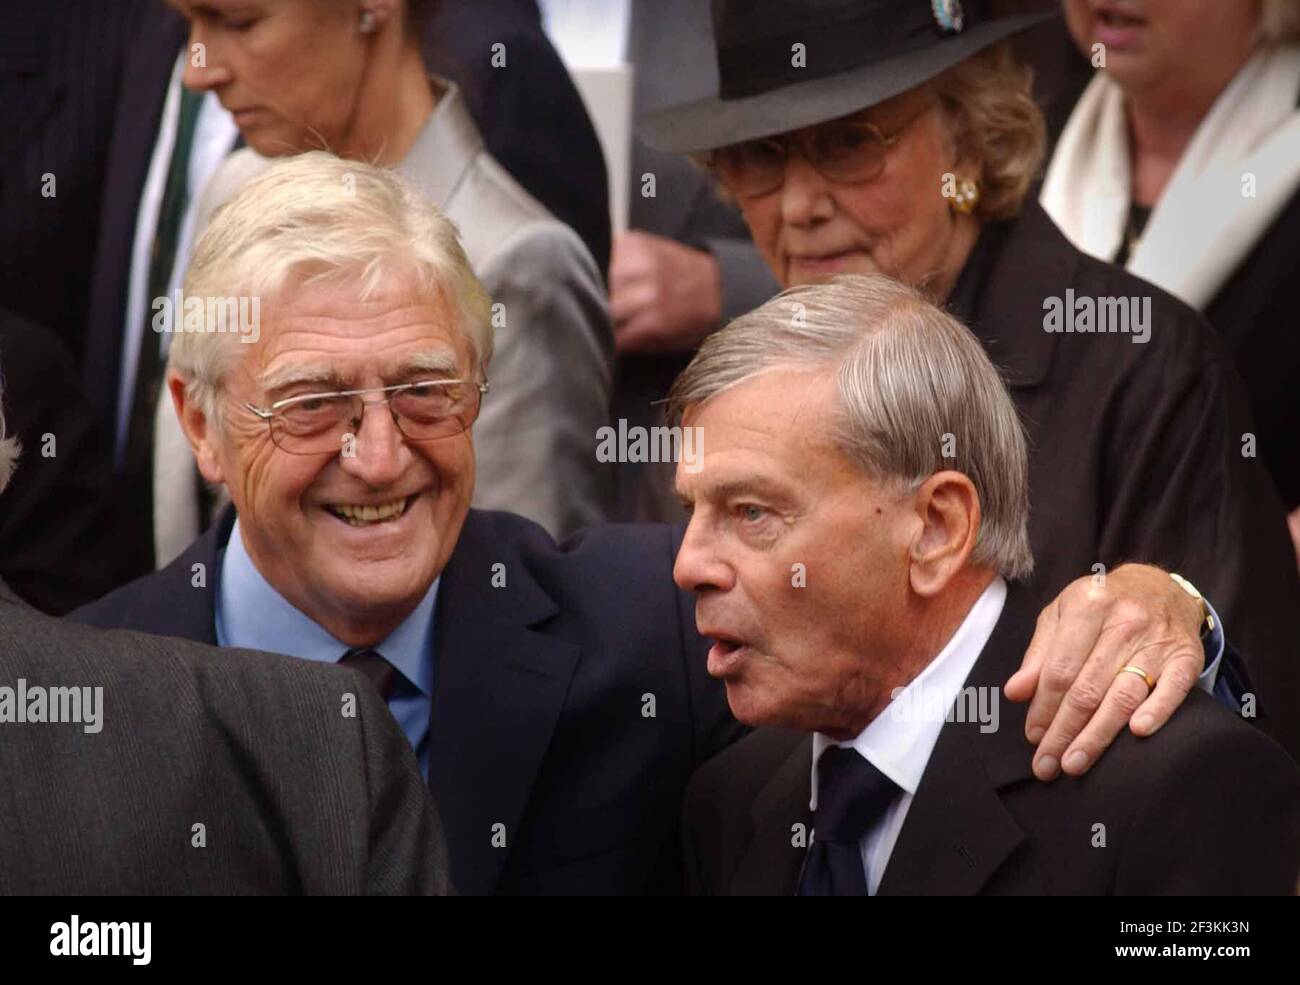 MICHAEL PARKINSON AND DICKY BIRD AT THE MEMORIAL TO PAUL GETTY AT WESTMINSTER CATHEDRAL.9/9/03 PILSTON Stock Photo